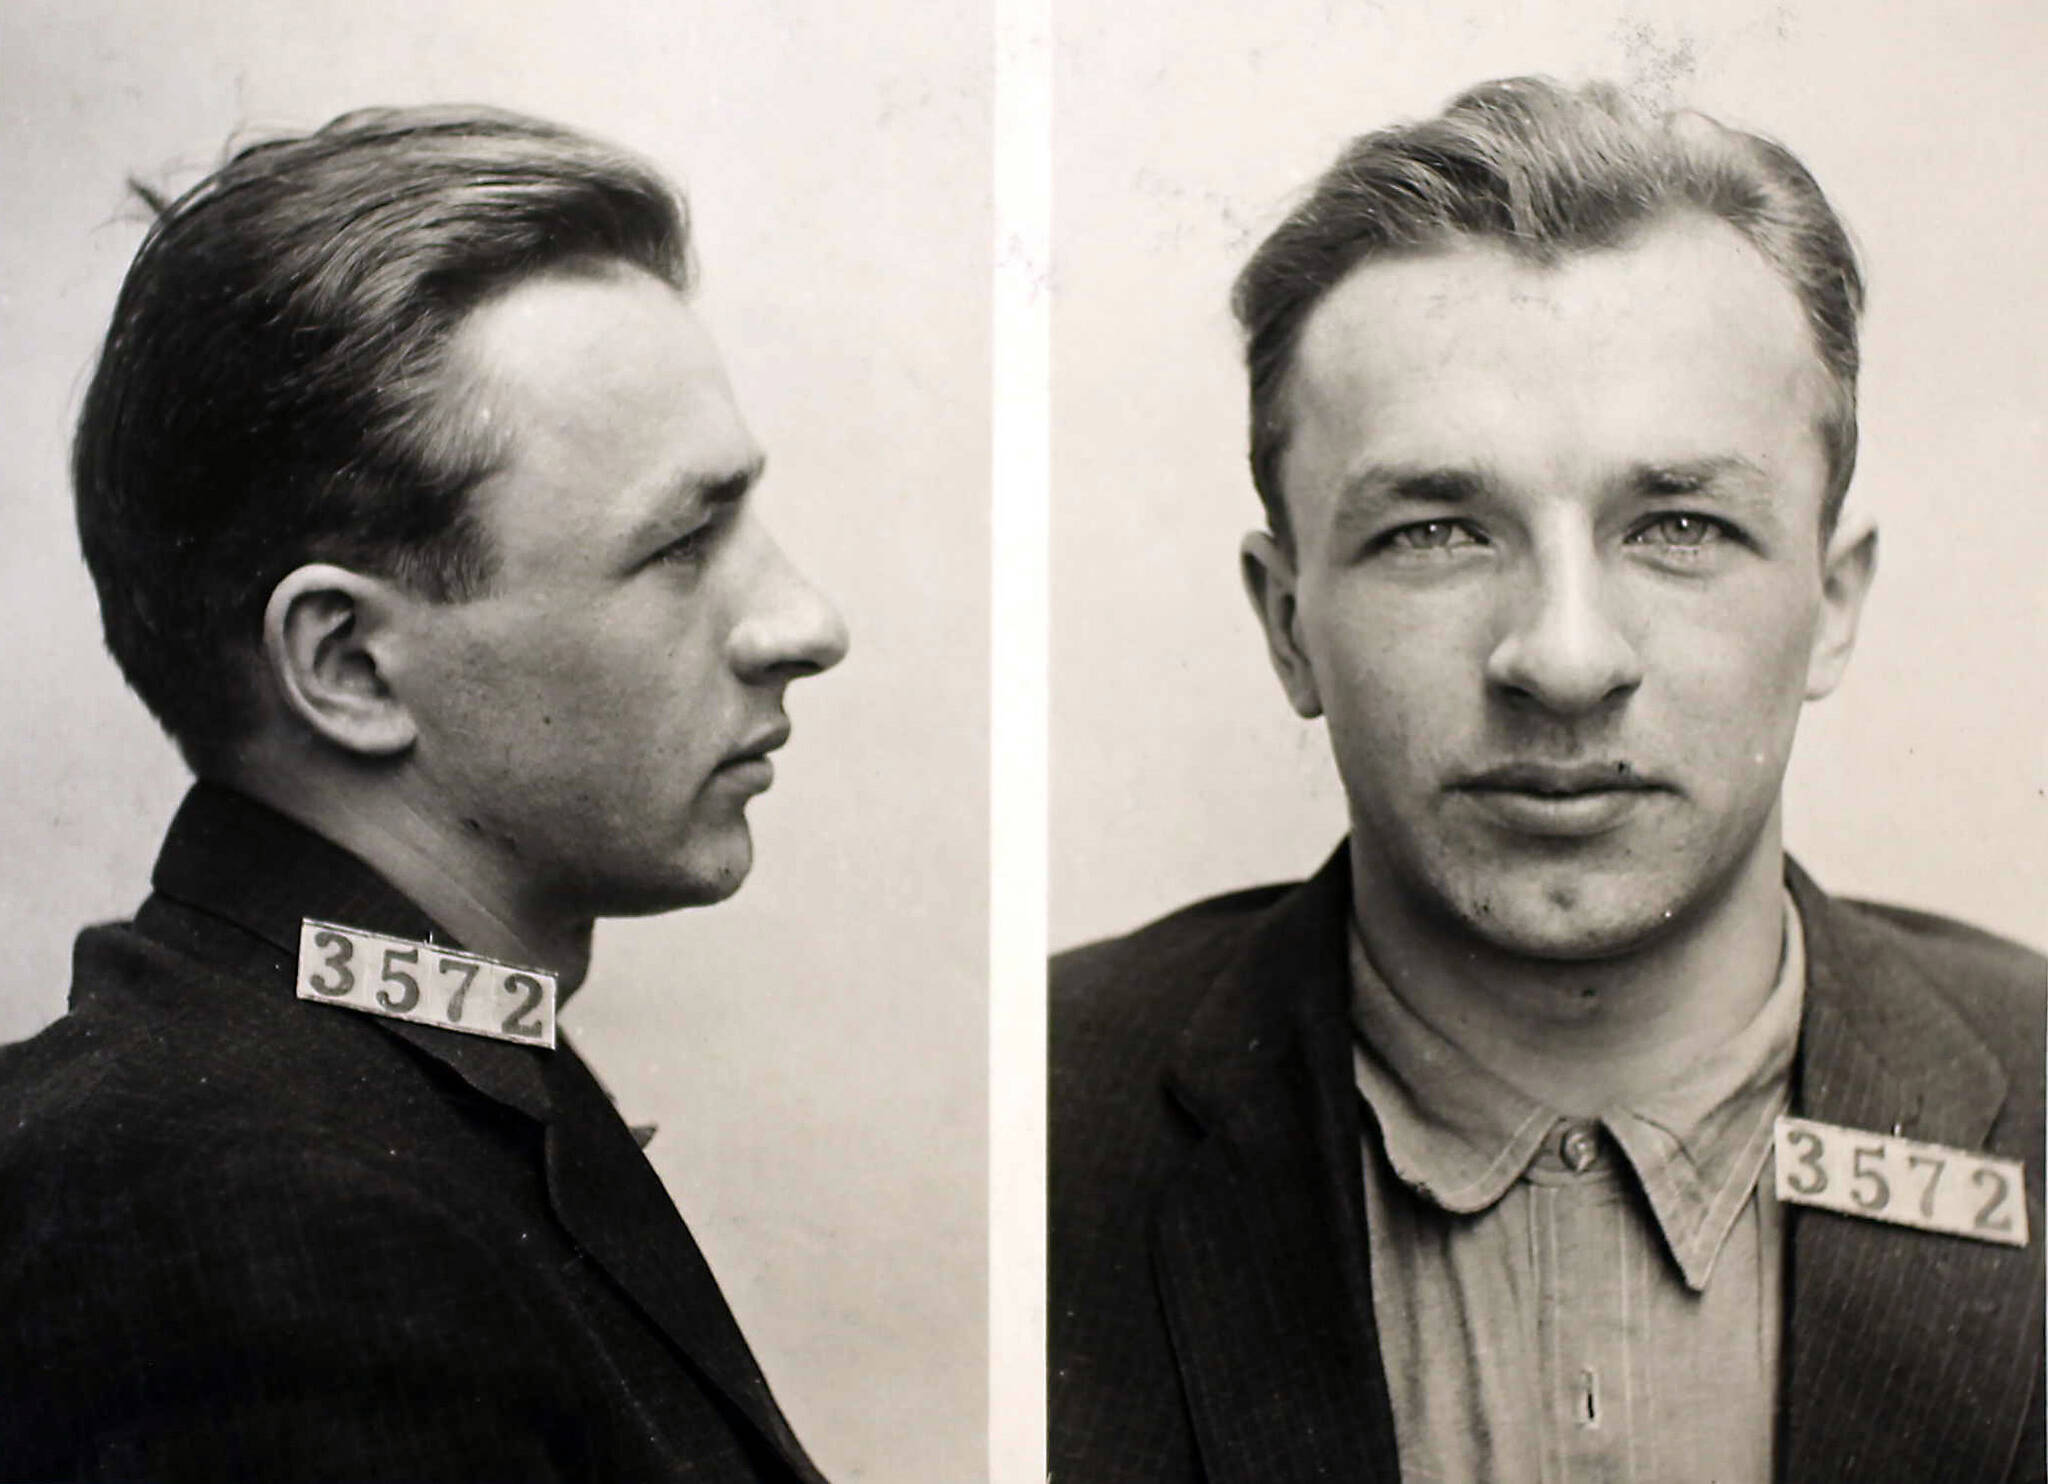 Photo courtesy of the University of Alaska Fairbanks archives 
After Pres. Woodrow Wilson commuted his death sentence to life in prison, William Dempsey (inmate #3572) was delivered from Alaska to the federal penitentiary on McNeil Island, Wash. These were his intake photos.